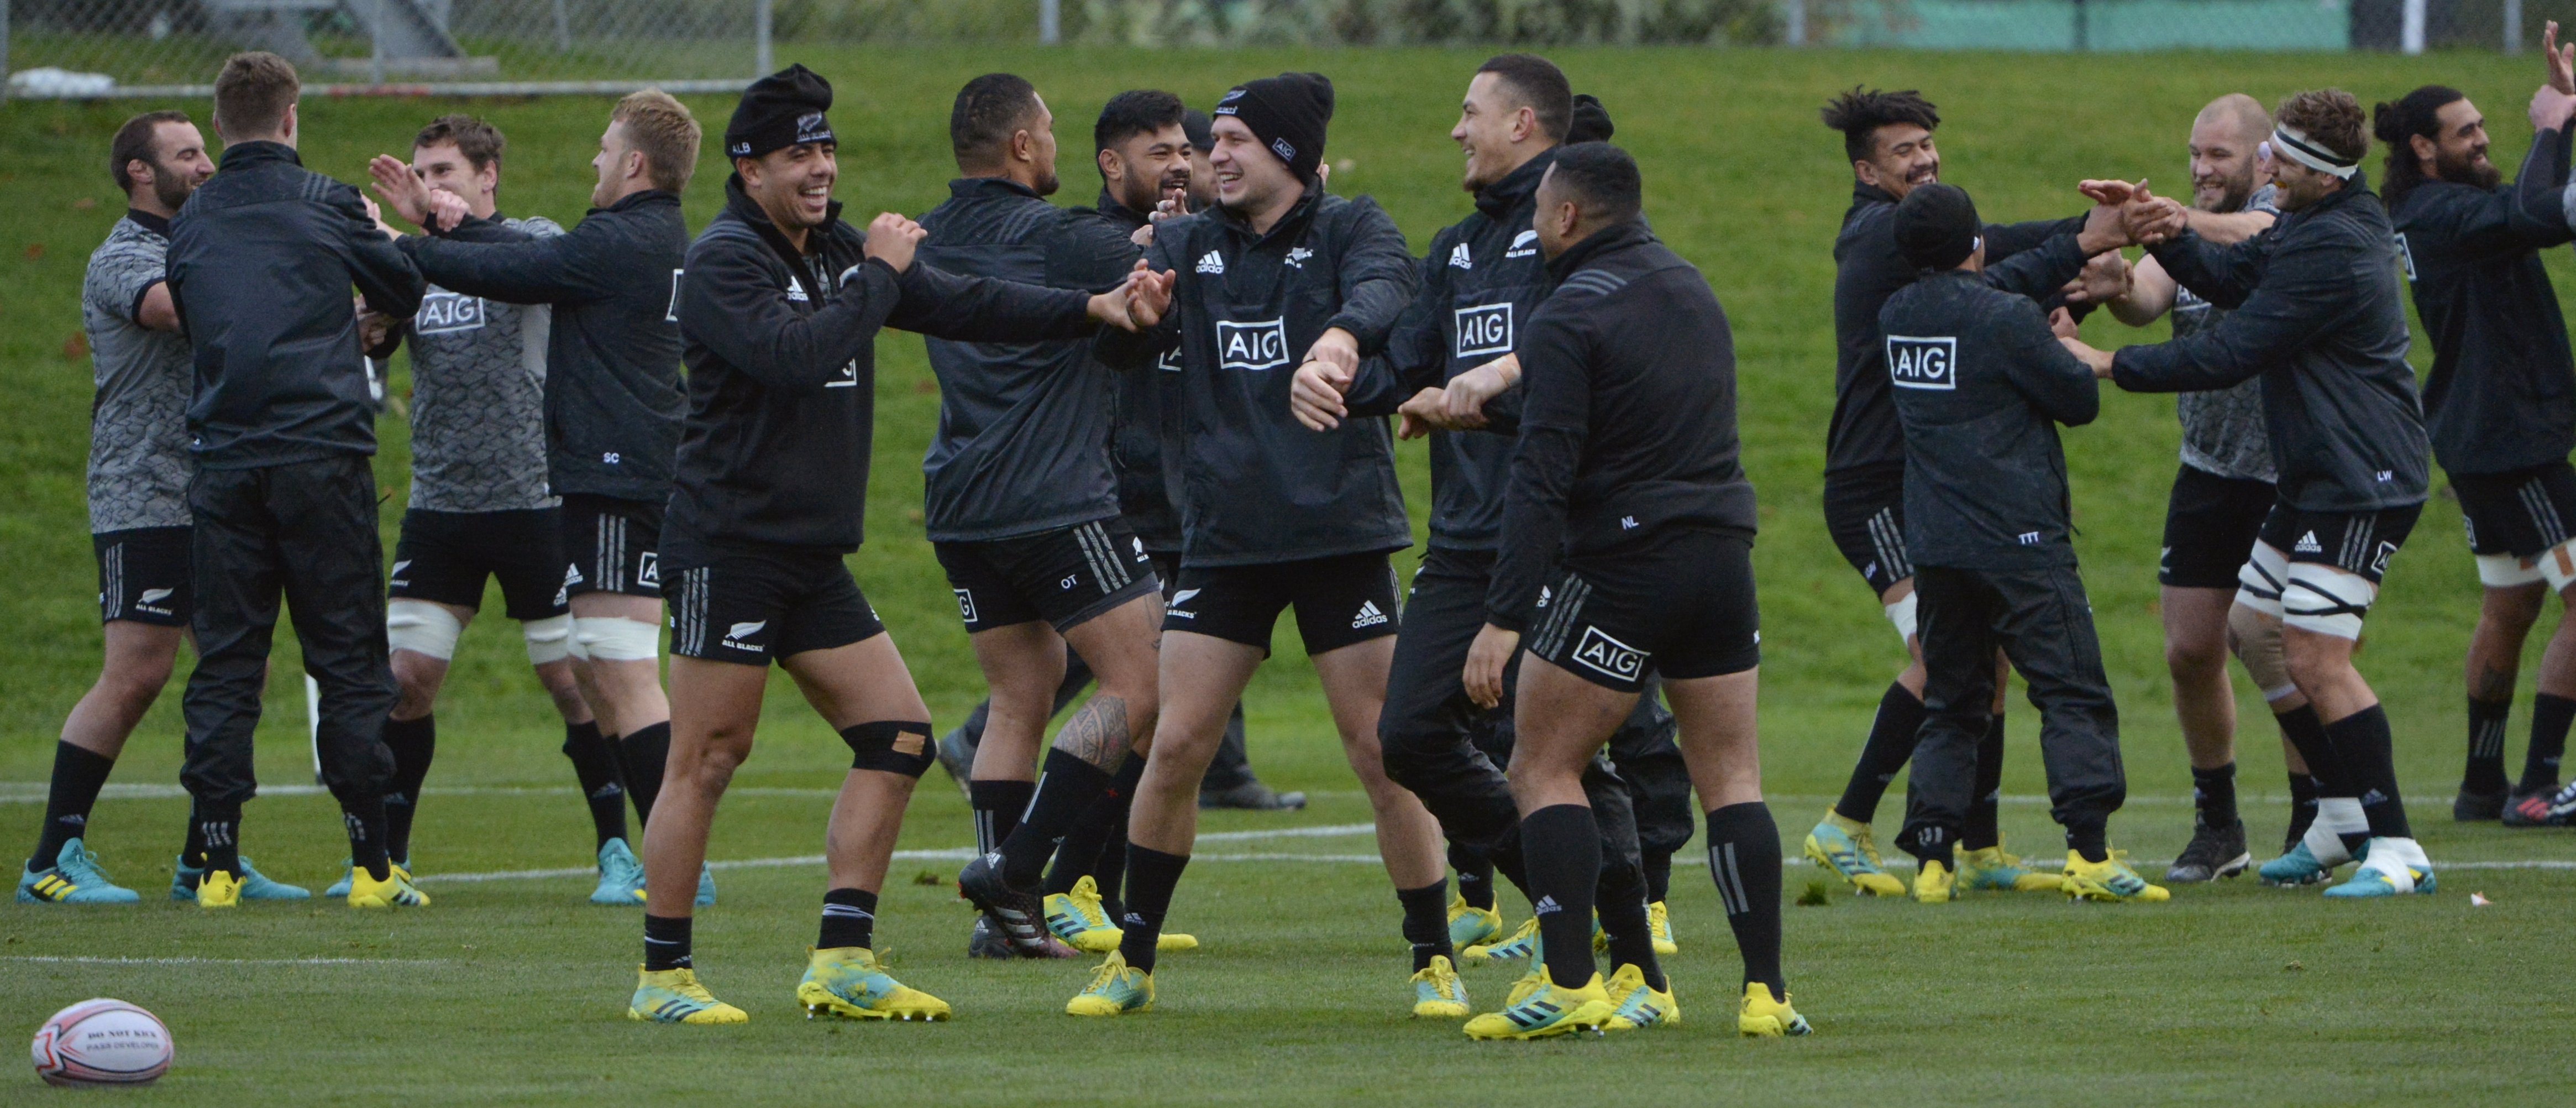 The All Blacks enjoy a lighter moment during training at the University Oval in Dunedin yesterday...